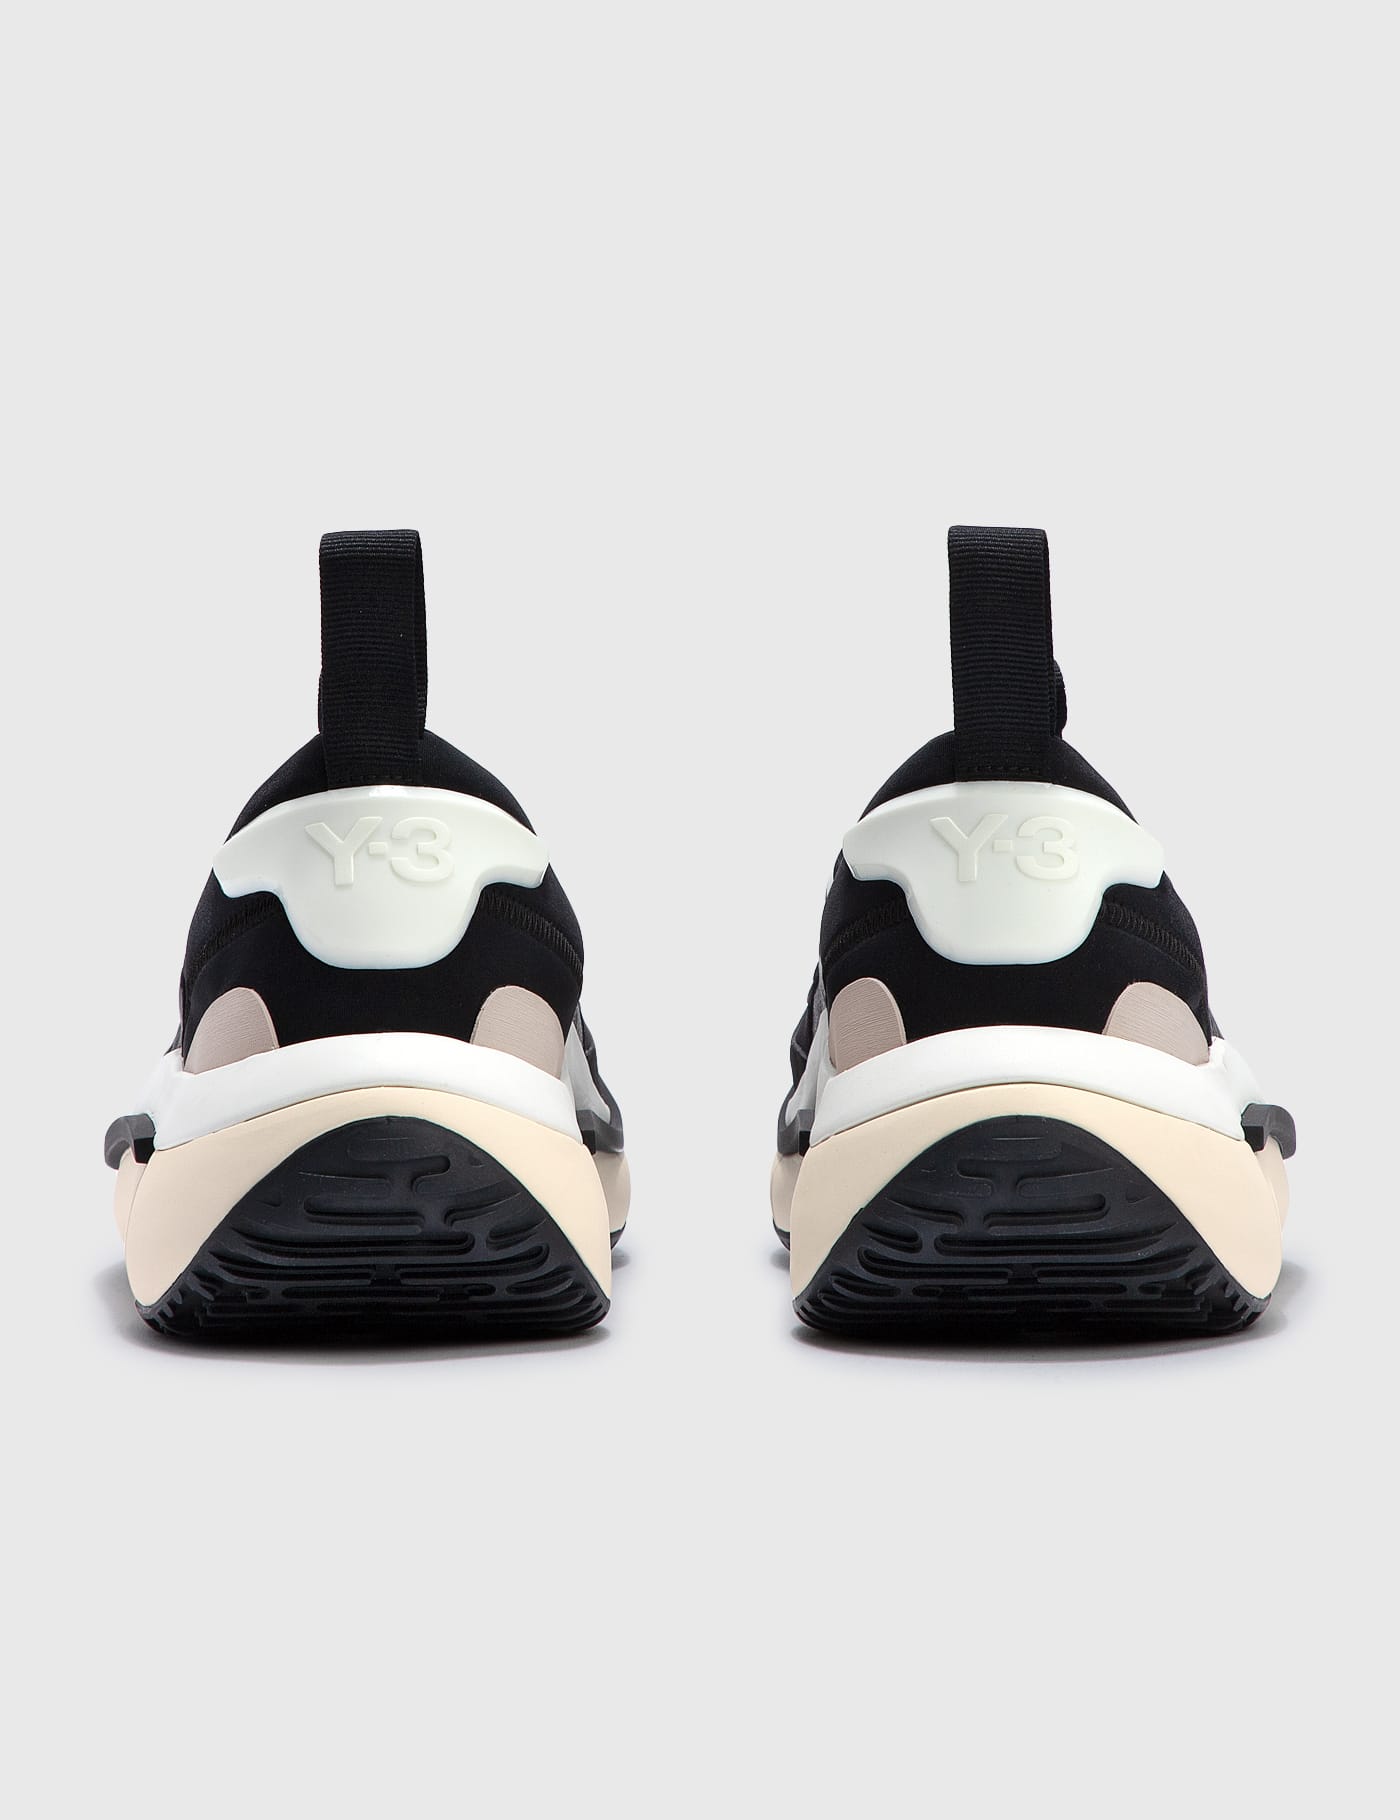 Y-3 - Y-3 Qisan Cozy Shoes | HBX - Globally Curated Fashion and 